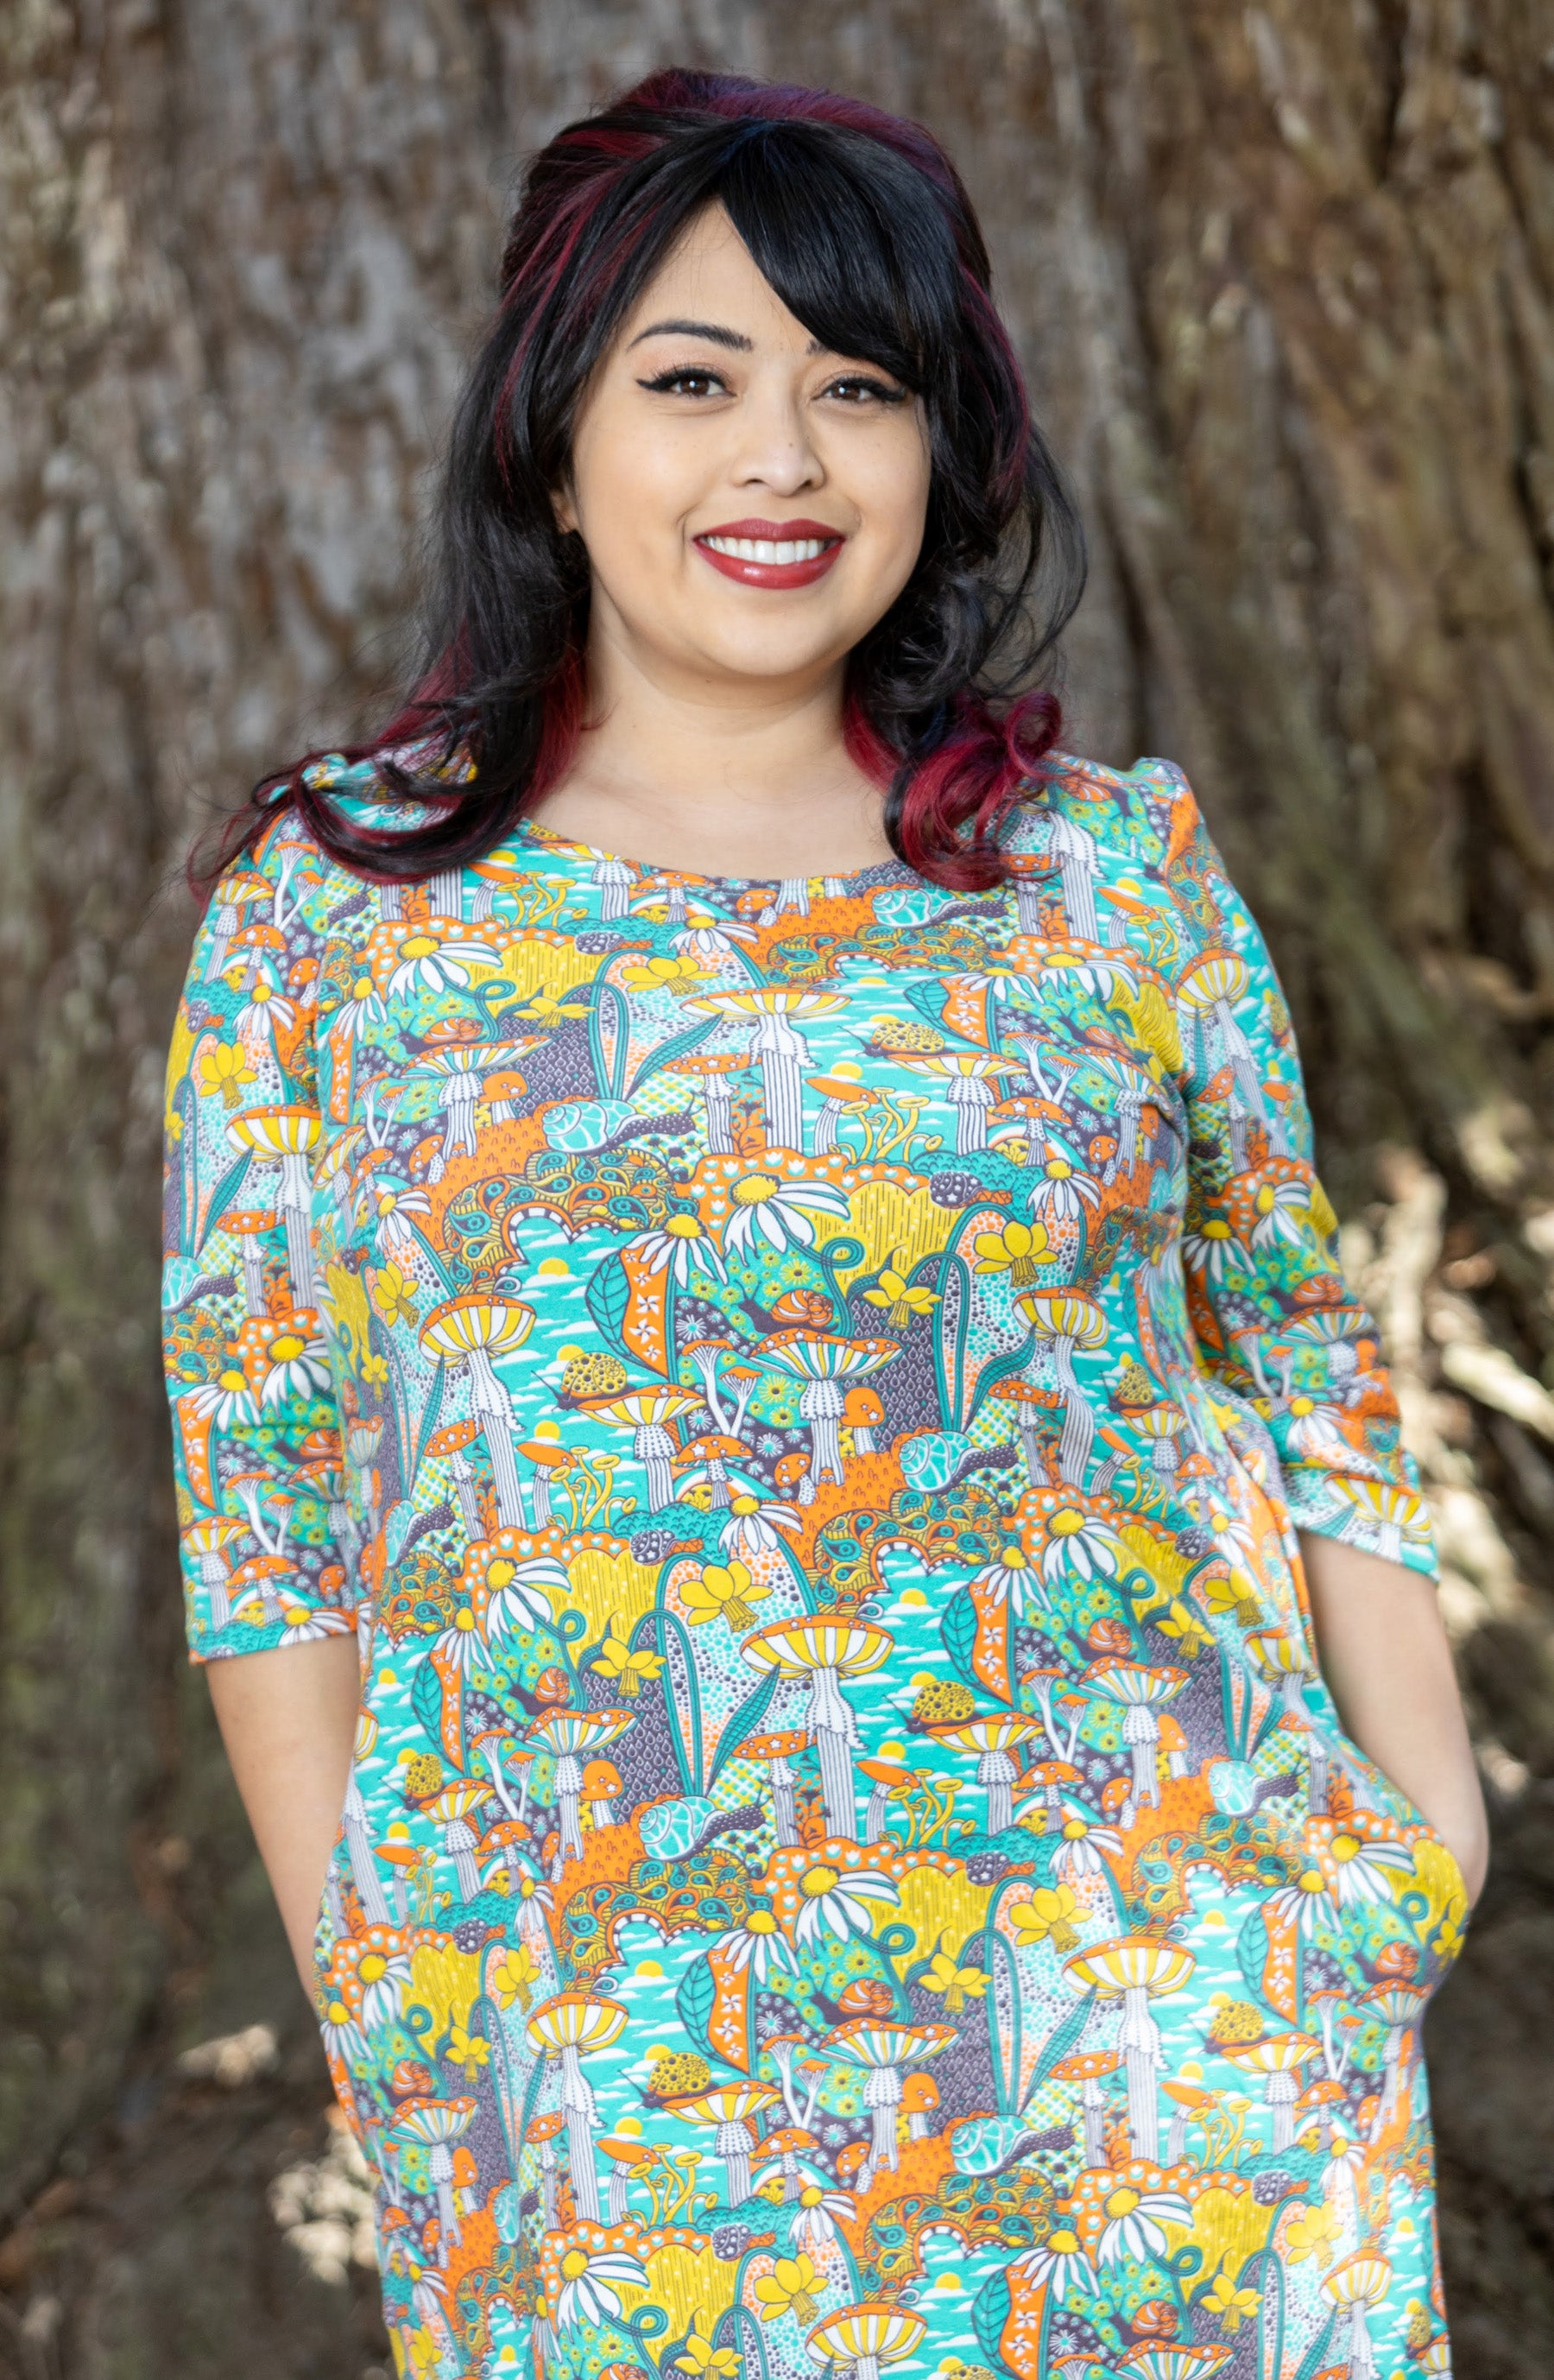 Model wearing teal, orange and yellow pocket tunic with mushrooms, flowers and snails